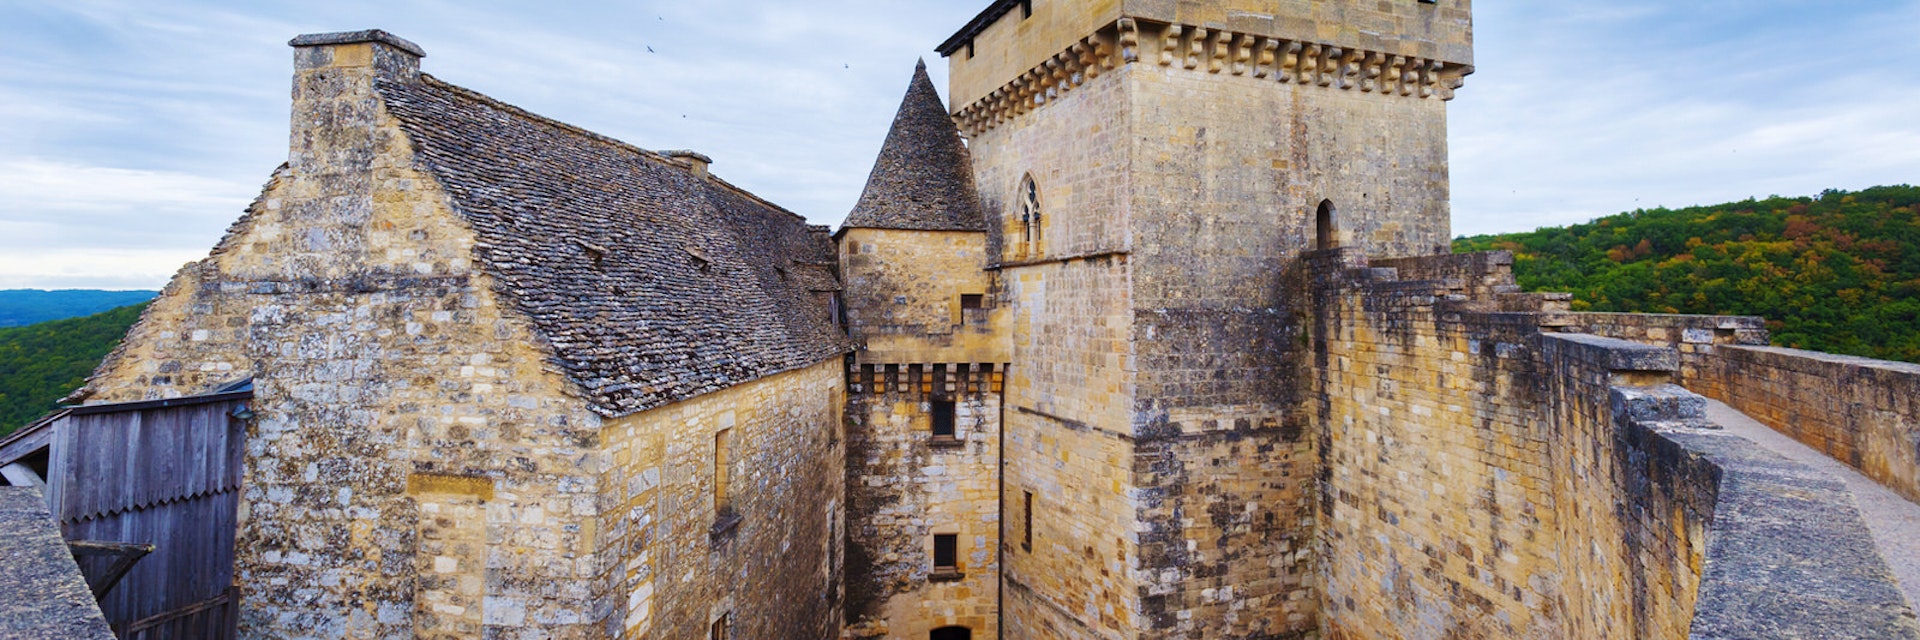 castle of castelnaud la chapelle dordogne perigord France; Shutterstock ID 131409035; Your name (First / Last): Emma Sparks; GL account no.: 65050; Netsuite department name: Online Editorial; Full Product or Project name including edition: Best in Europe POI updates